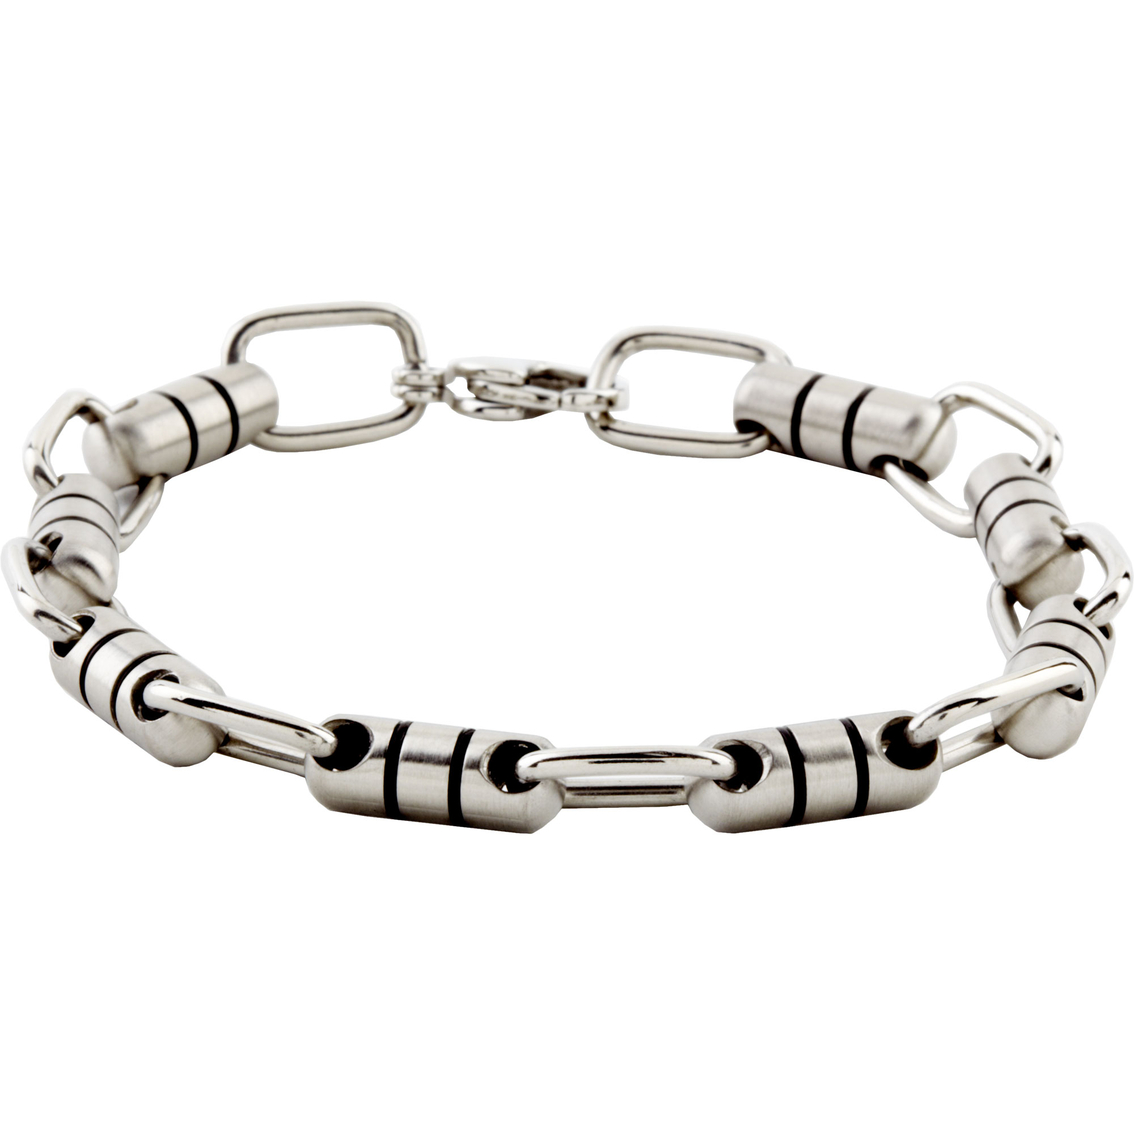 Stainless Steel Link Bracelet With Rubber Accents | Fashion Bracelets ...